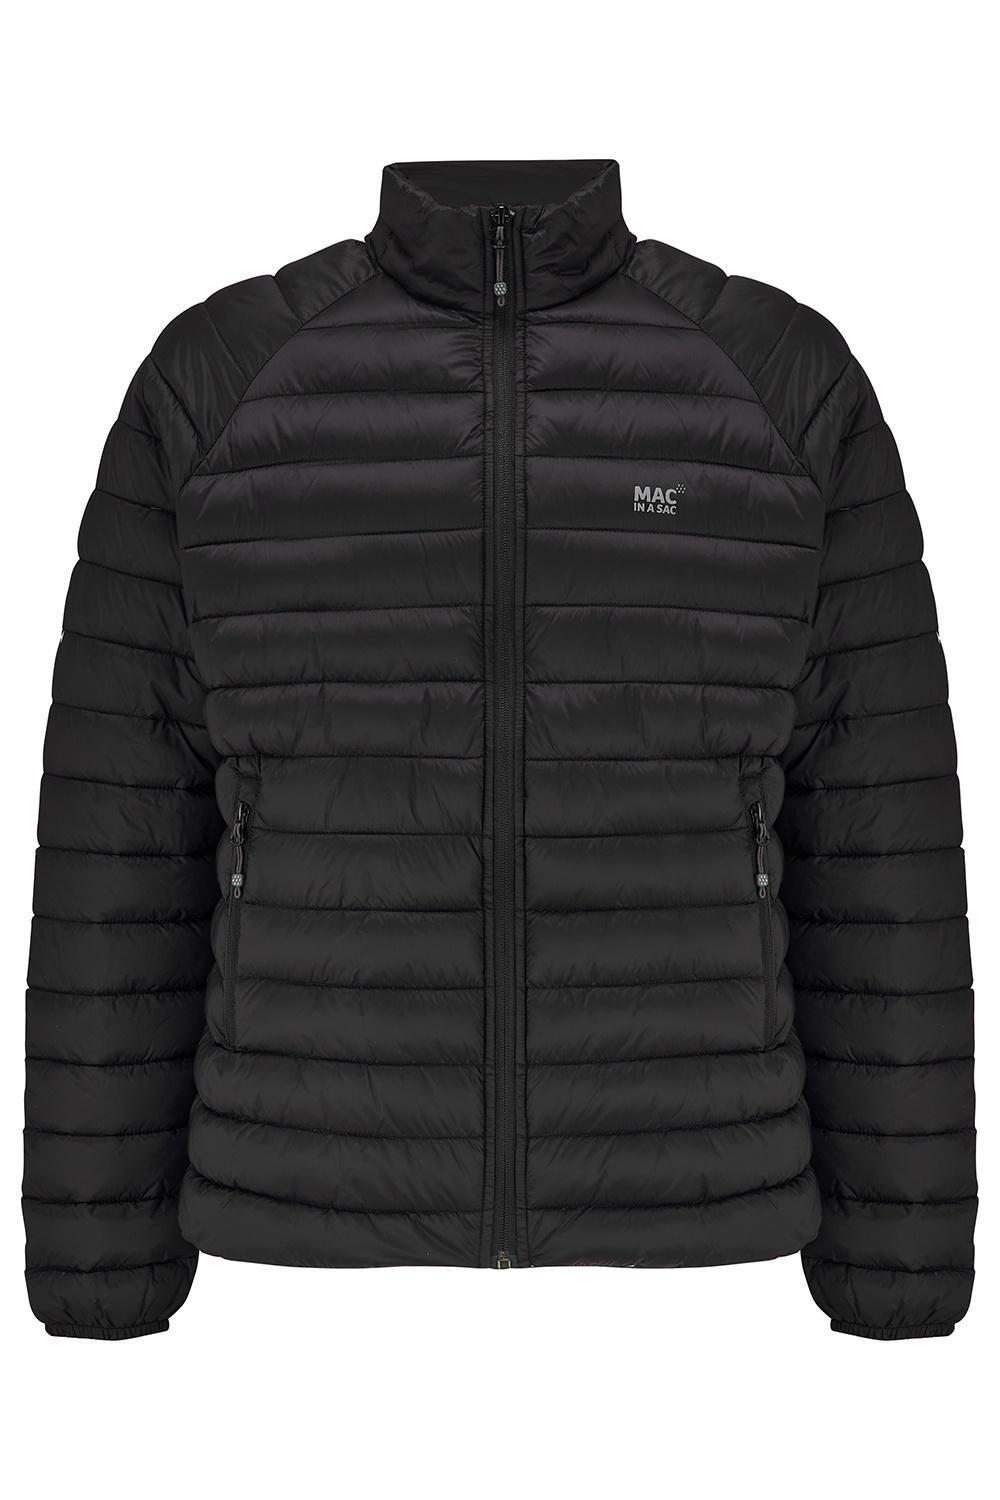 MAC IN A SAC Synergy Mens Insulated Jacket